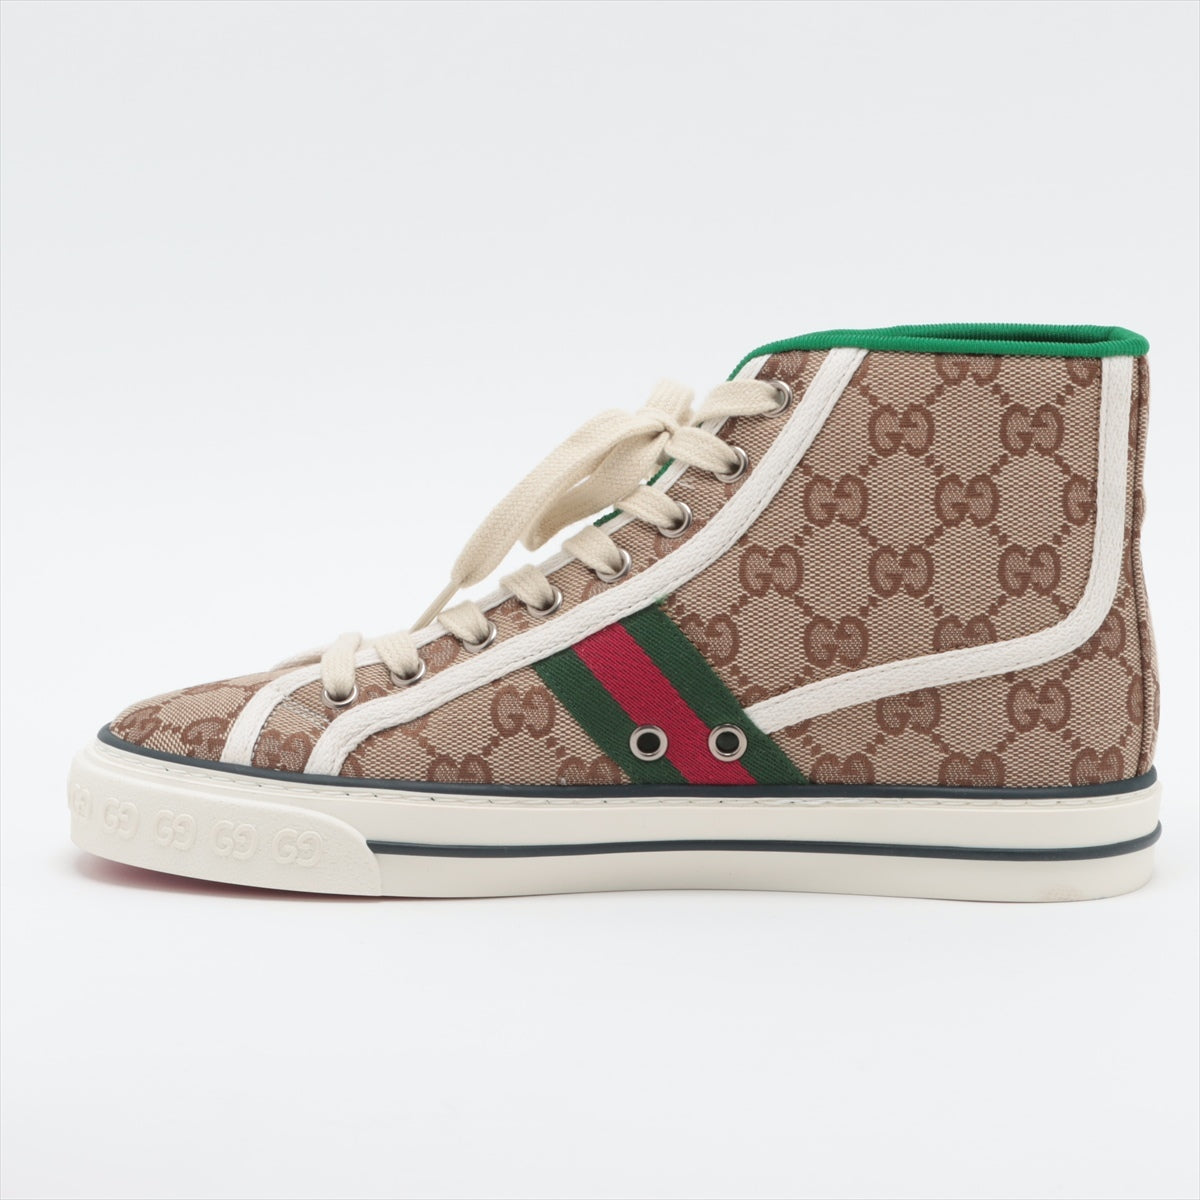 Gucci GG pattern Fabric High-top Sneakers 37+ Ladies' Brown TENNIS 1977 Is there a replacement string